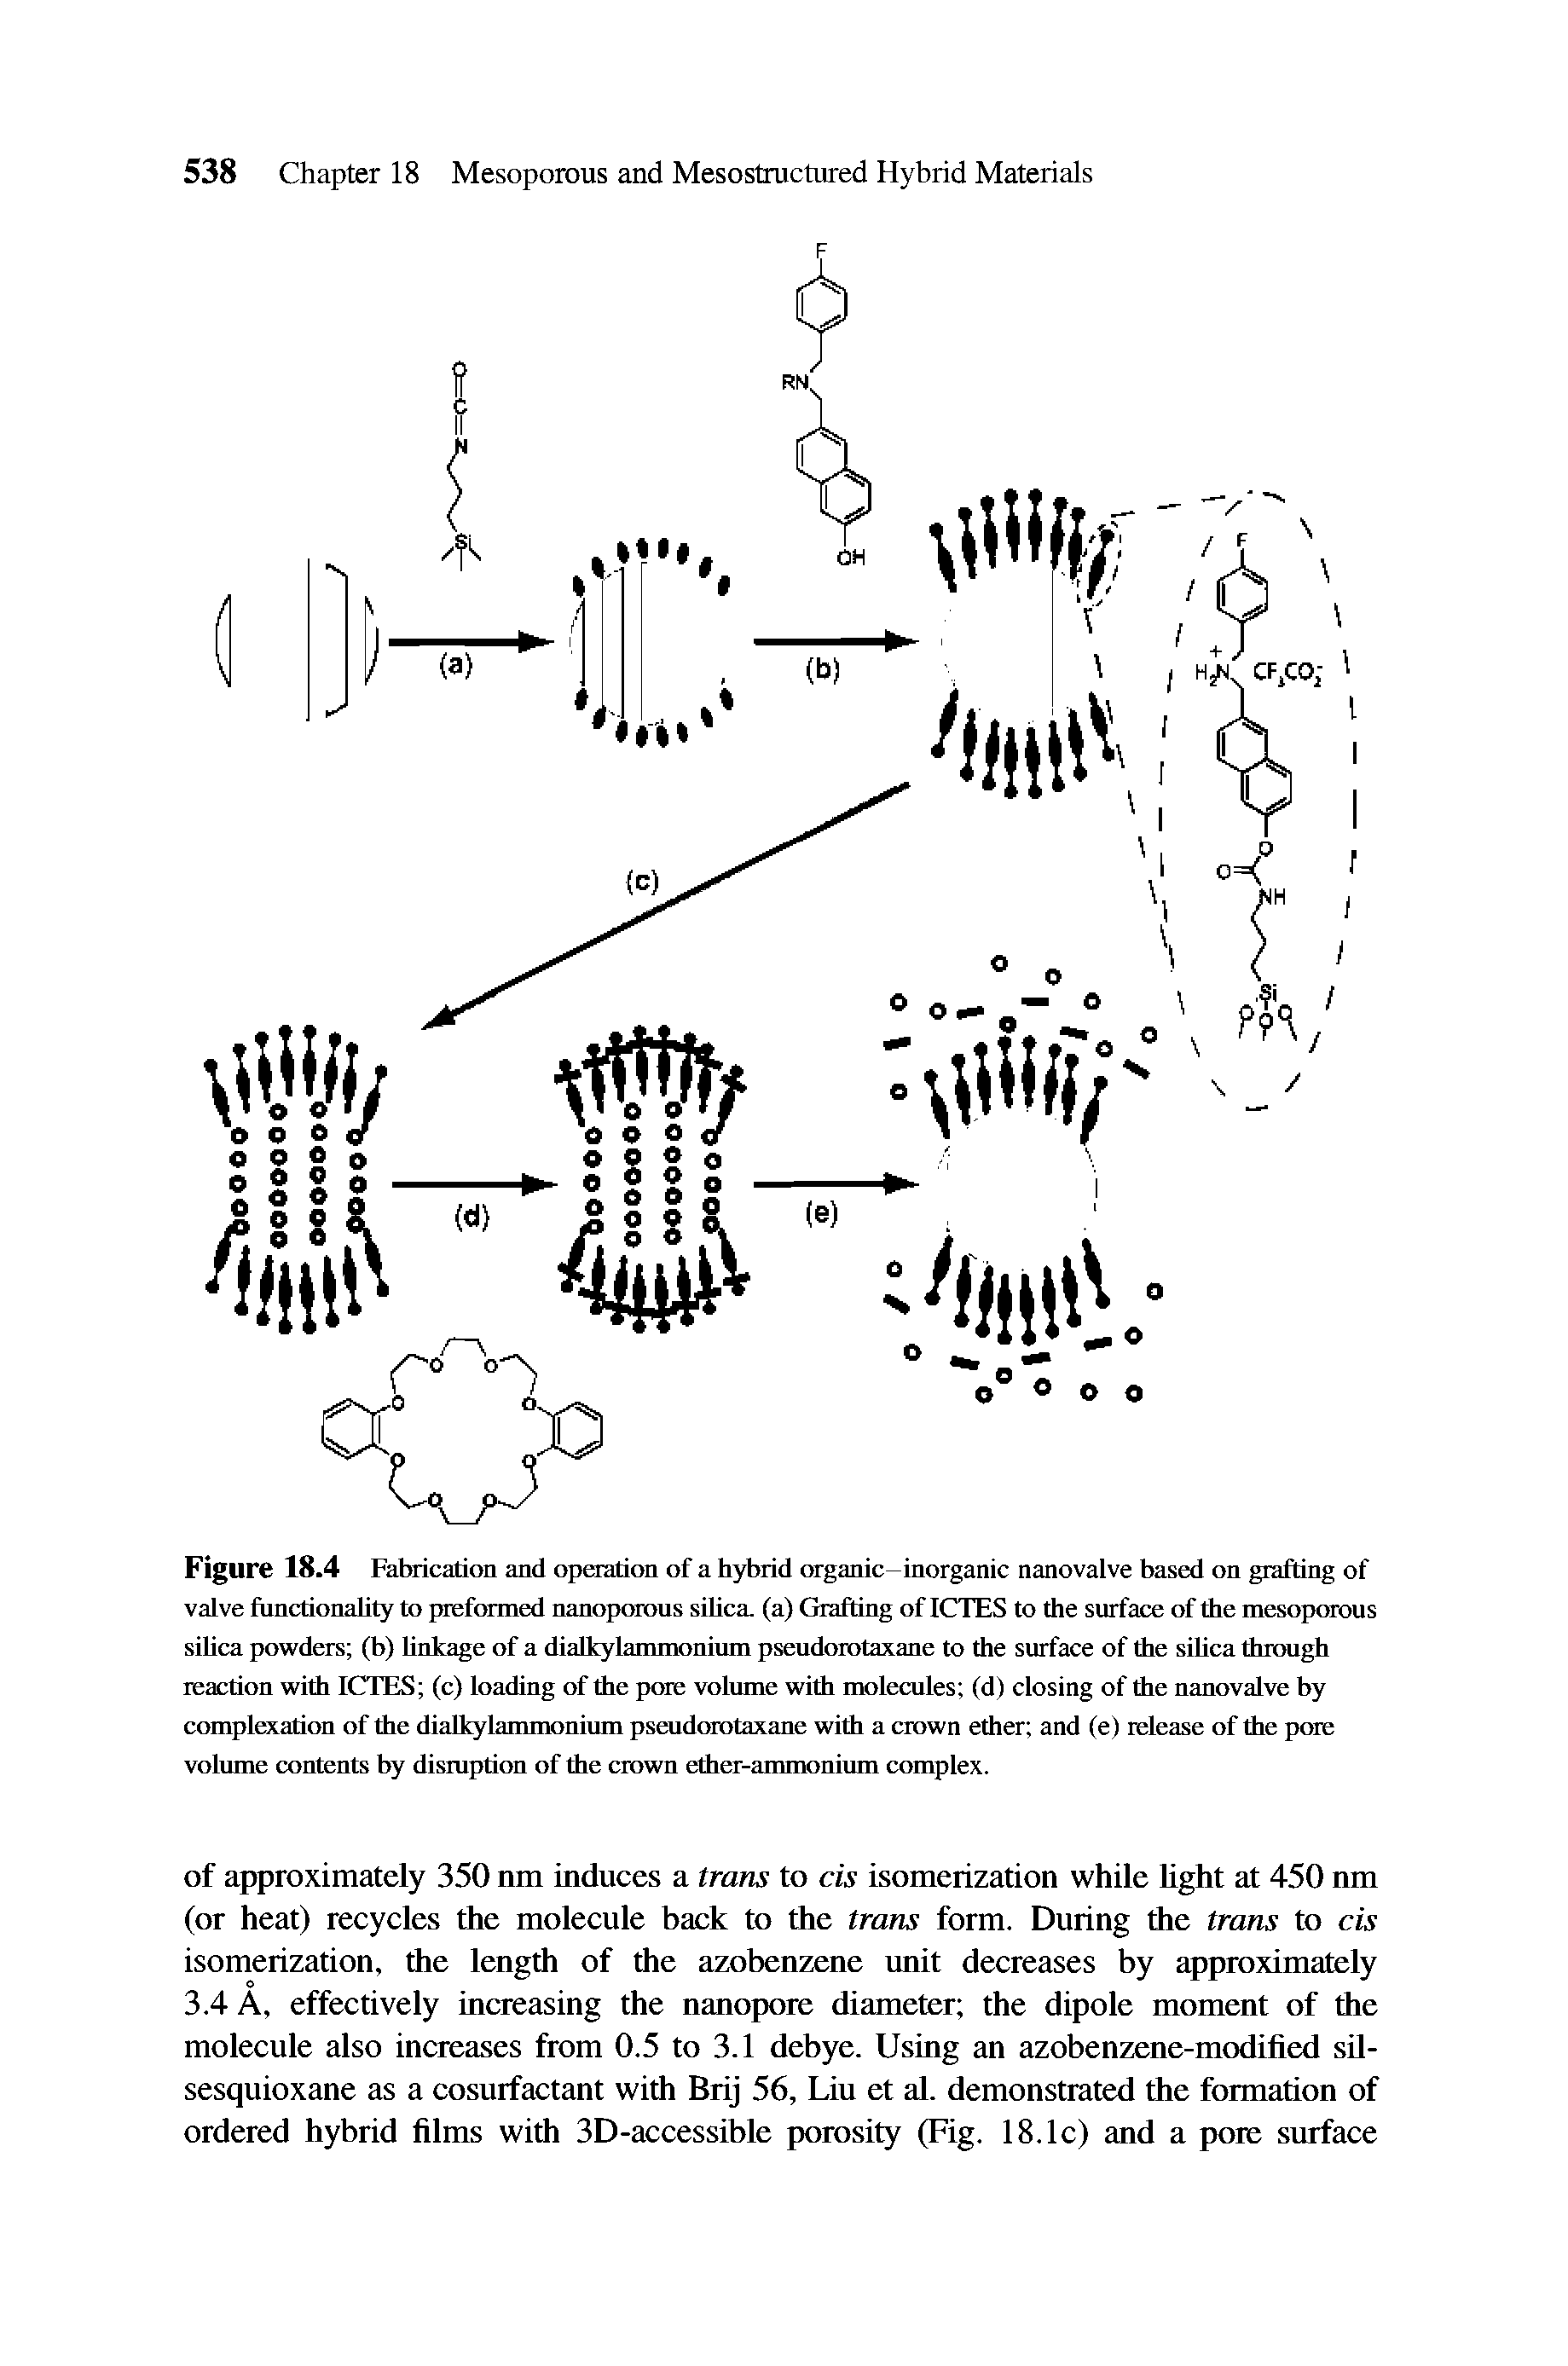 Figure 18.4 Fabrication and operation of a hybrid organic—inorganic nanovalve based on grafting of valve functionality to preformed nanoporous silica, (a) Grafting of ICTES to the surface of the mesoporous silica powders (b) linkage of a dialkylammonium pseudorotaxane to the surface of the silica through reaction with ICTES (c) loading of the pore volume with molecules (d) closing of the nanovalve by complexation of the dialkylammonium pseudorotaxane with a crown ether and (e) release of the pore volume contents by disruption of the crown ether-ammonium complex.